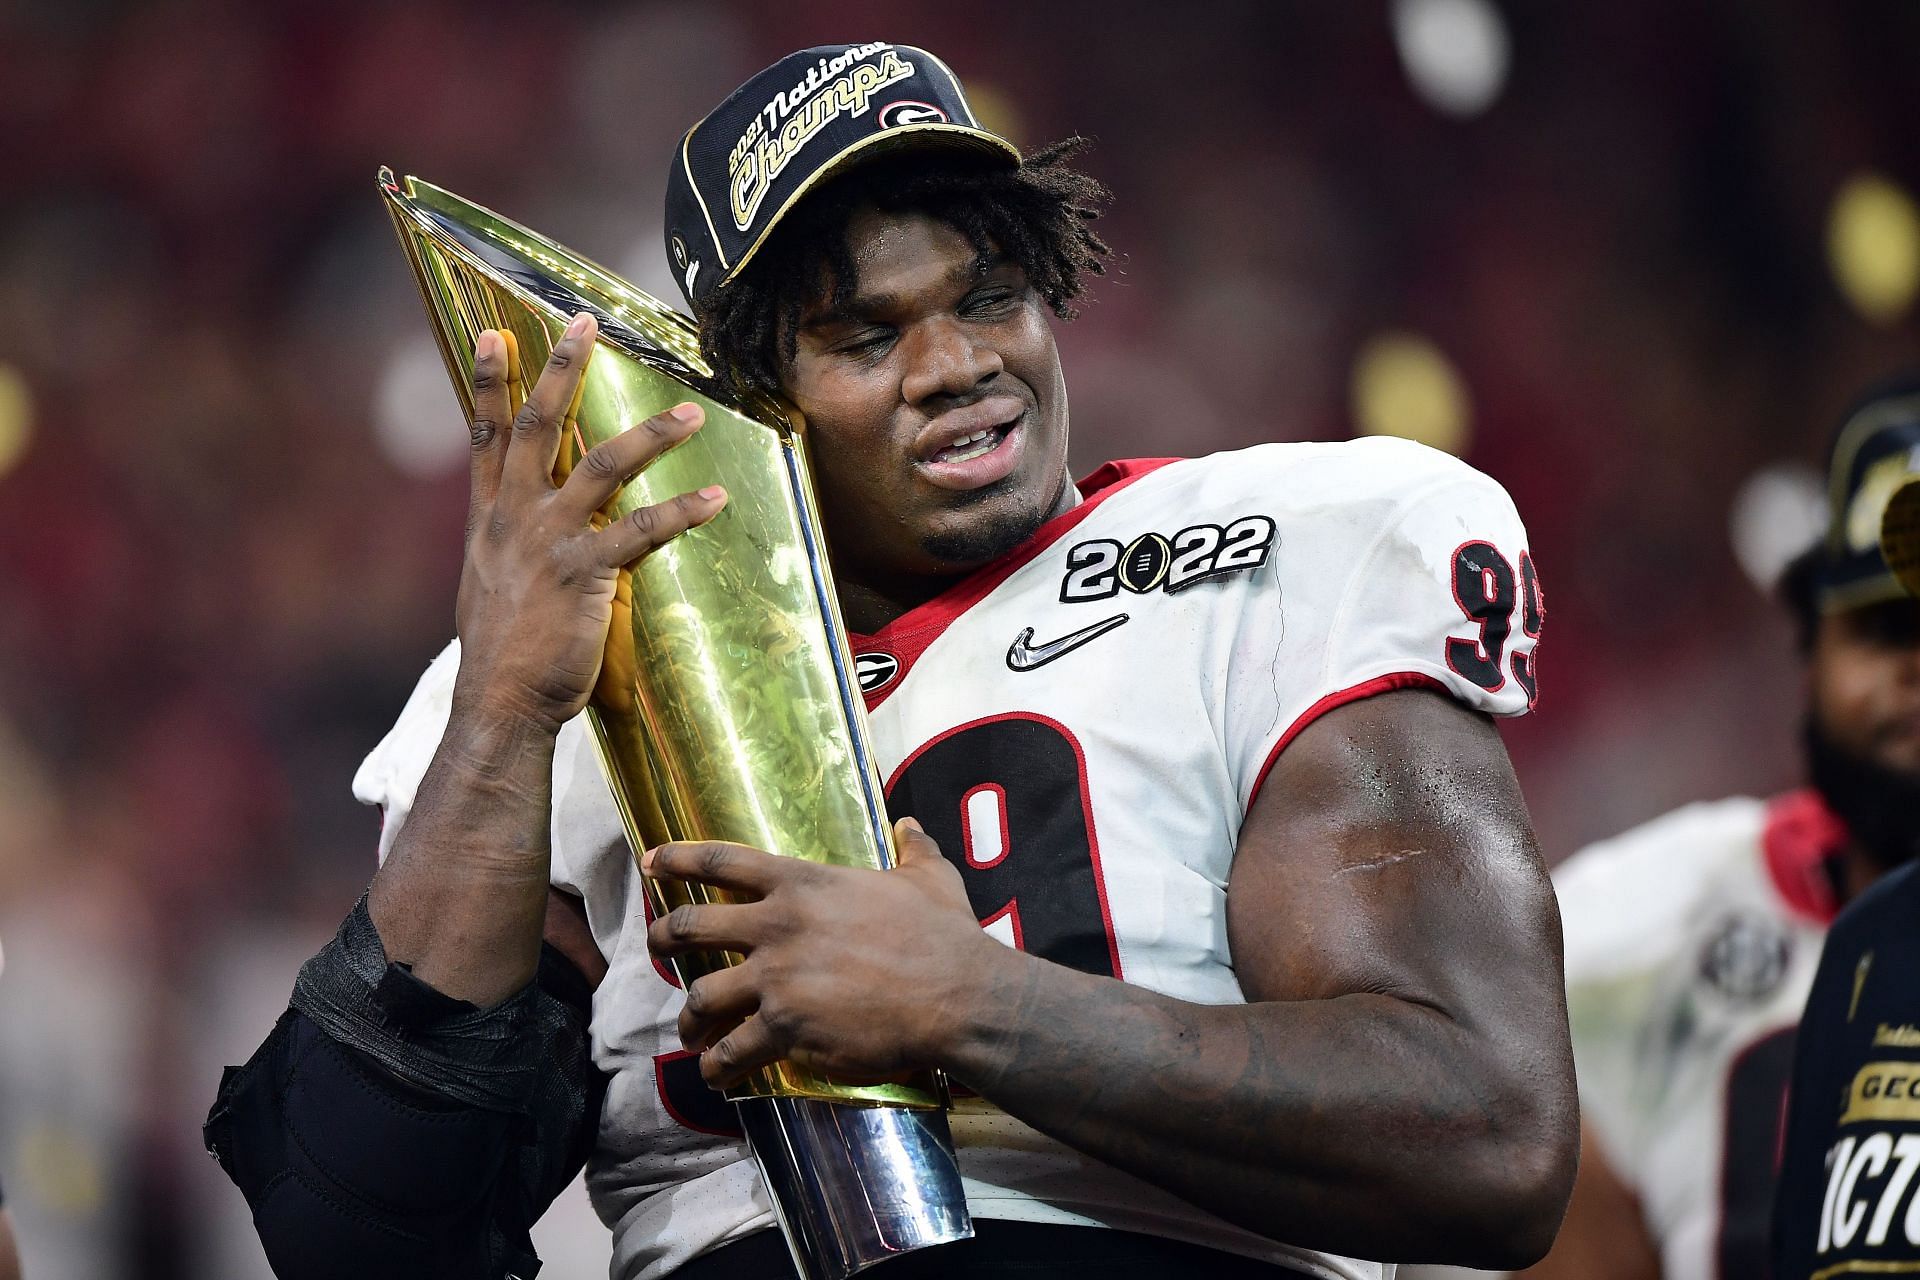 Davis was able to finish his business with the Bulldogs and win a championship.